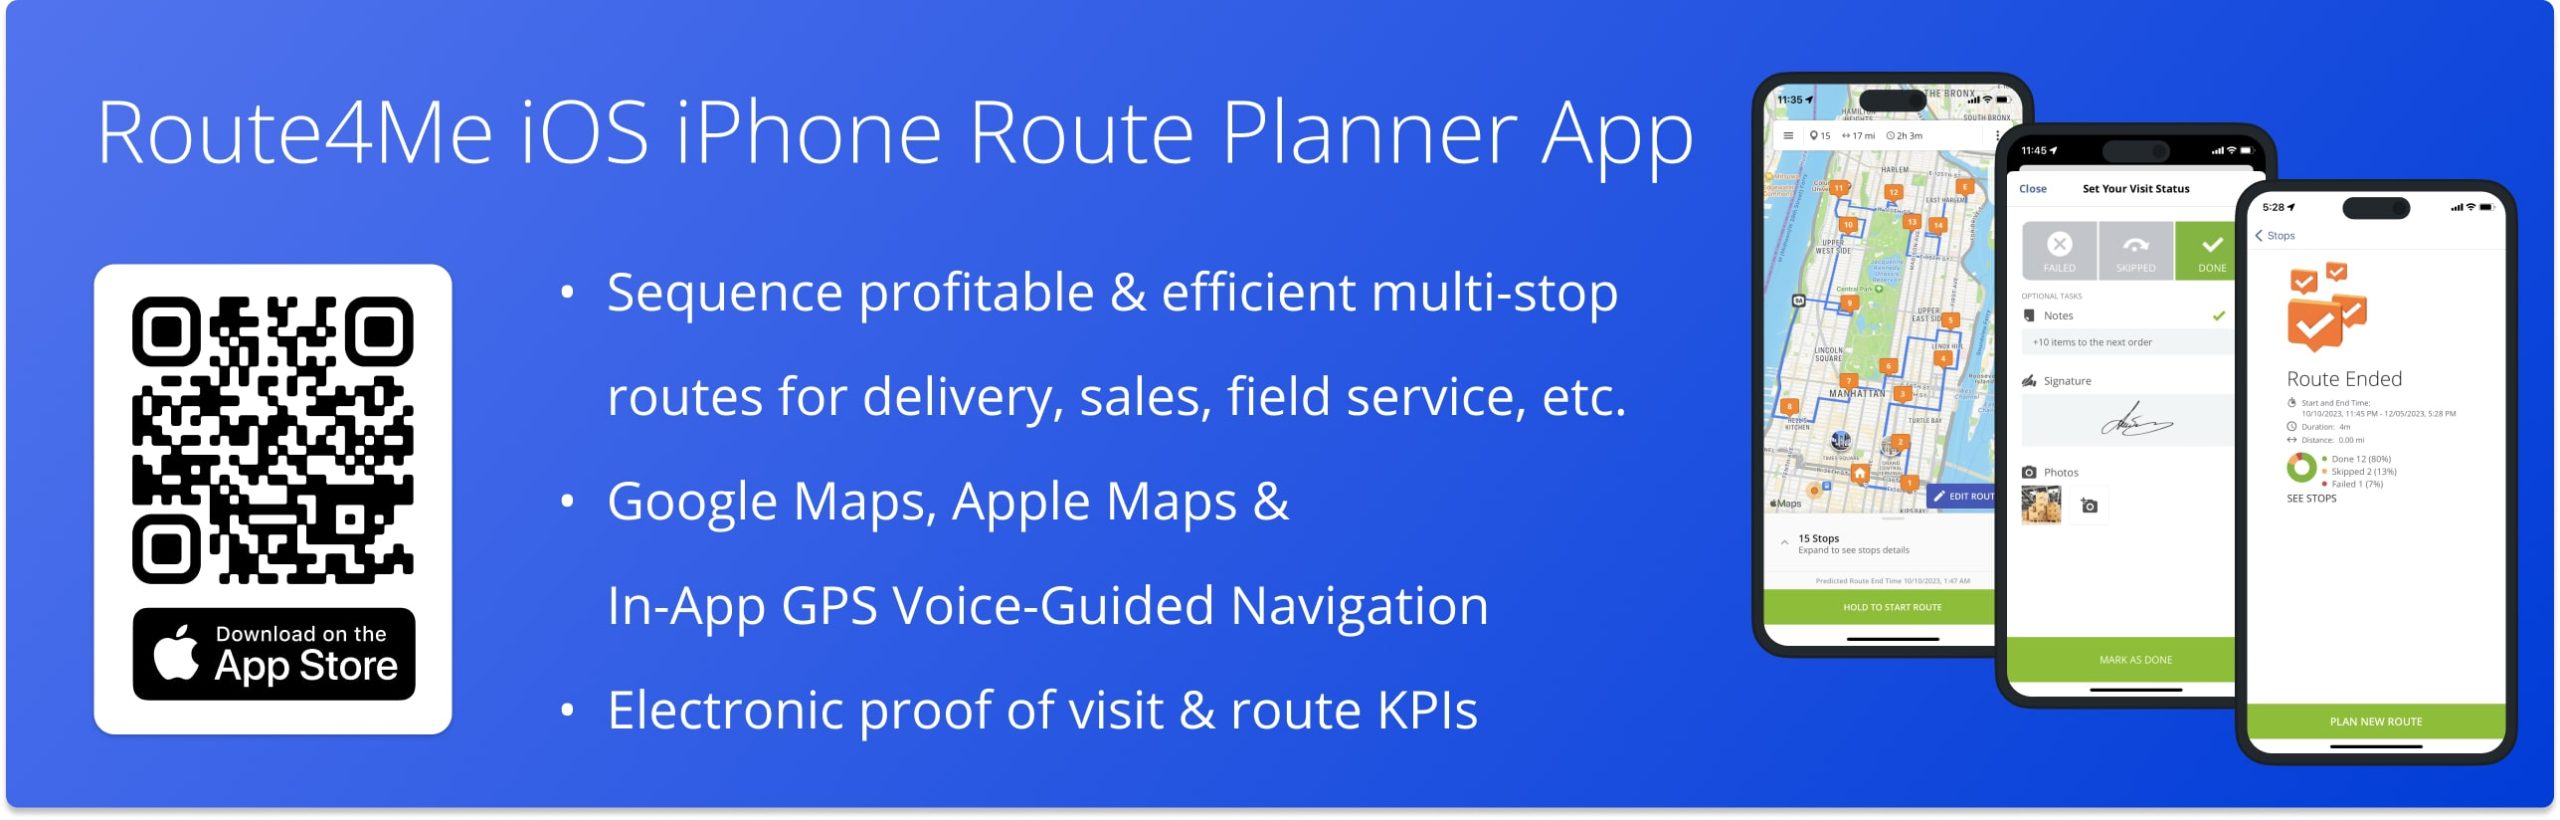 Download and use Route4Me's iOS iPhone Route Planner app for last-mile drivers to sequence multi-stop routes, navigate and complete routes, collect proof of delivery, and more.